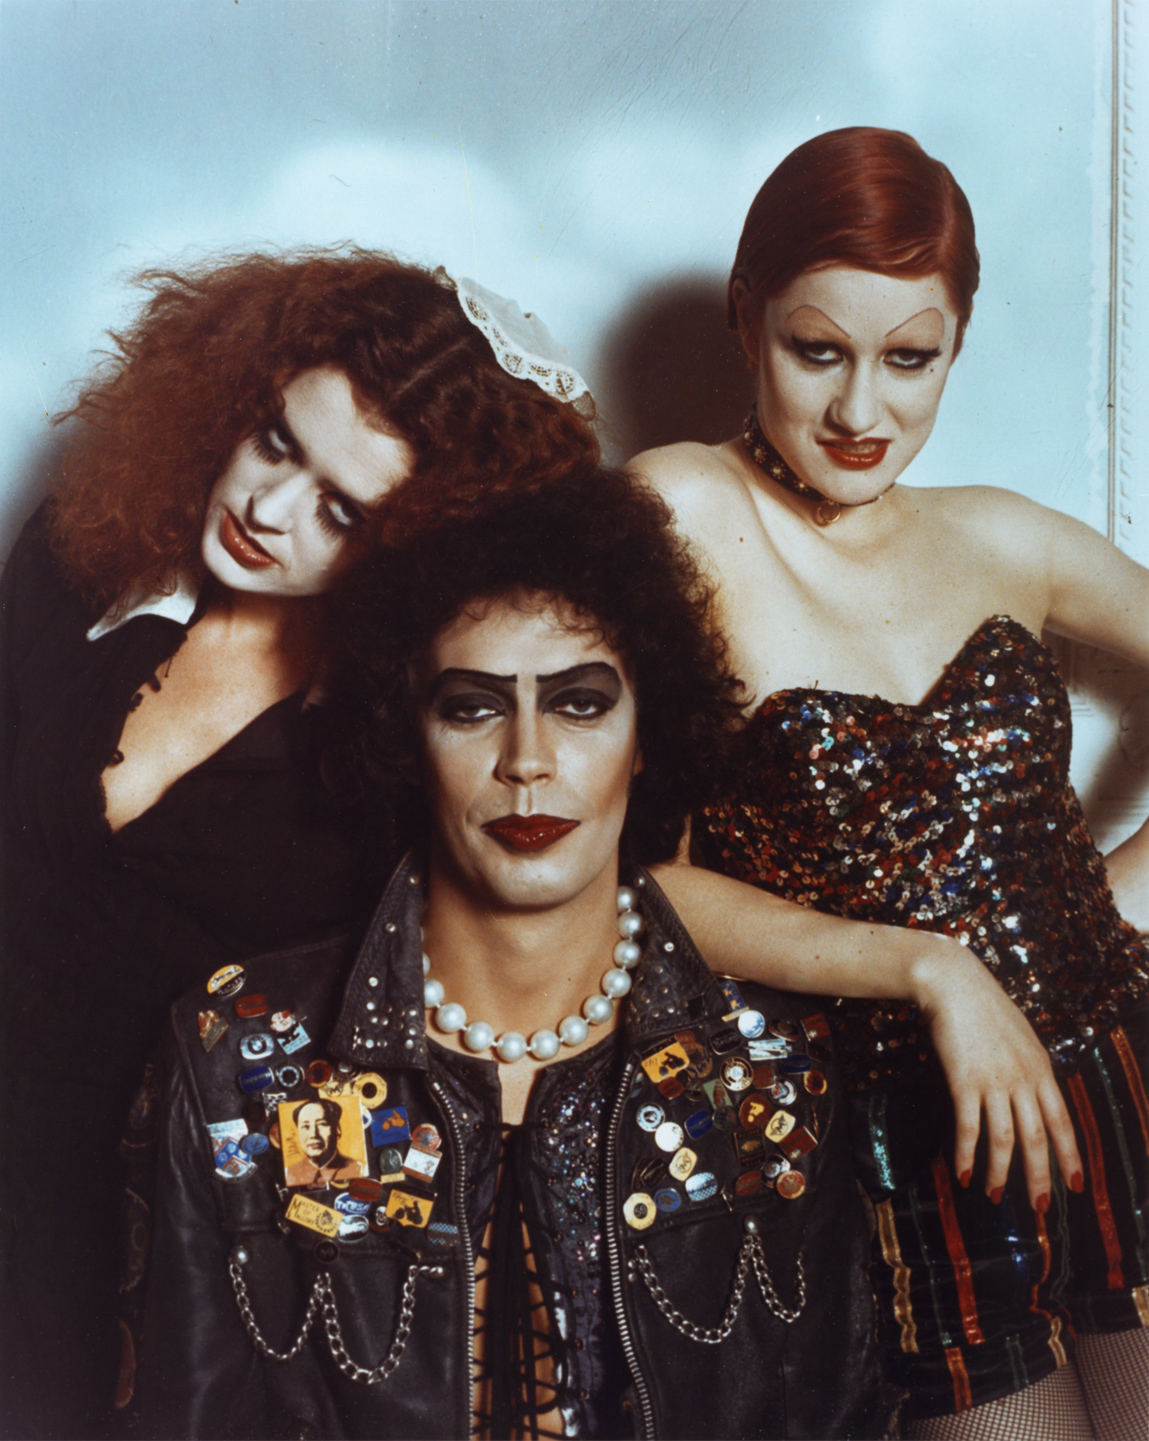 Copy of The Rocky Horror Picture Show